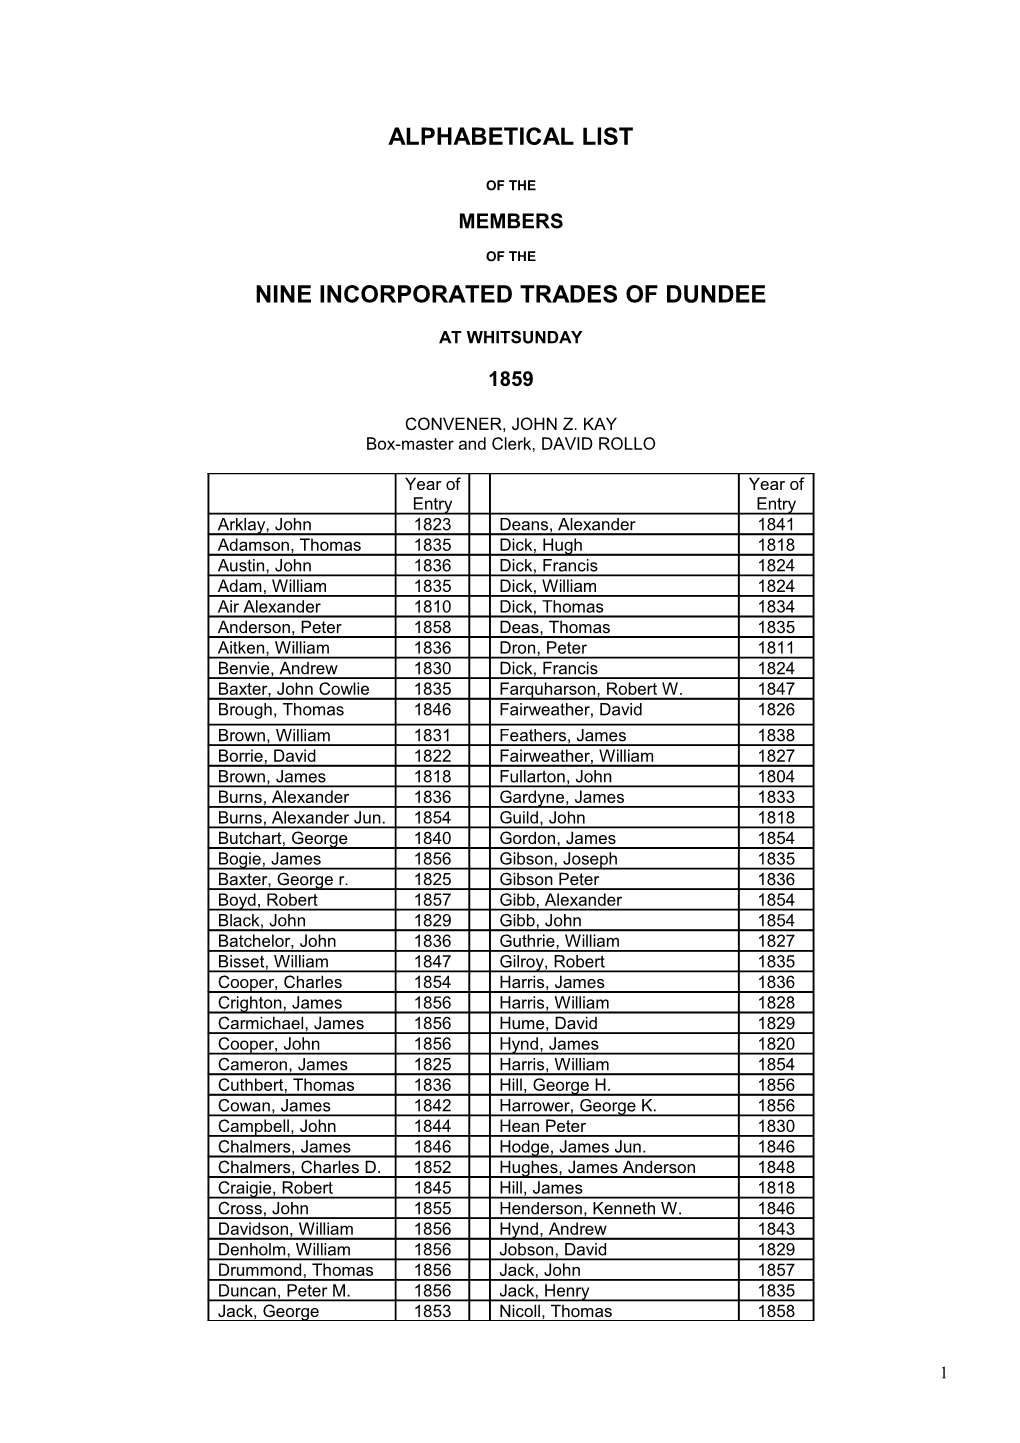 Nine Incorporated Trades of Dundee